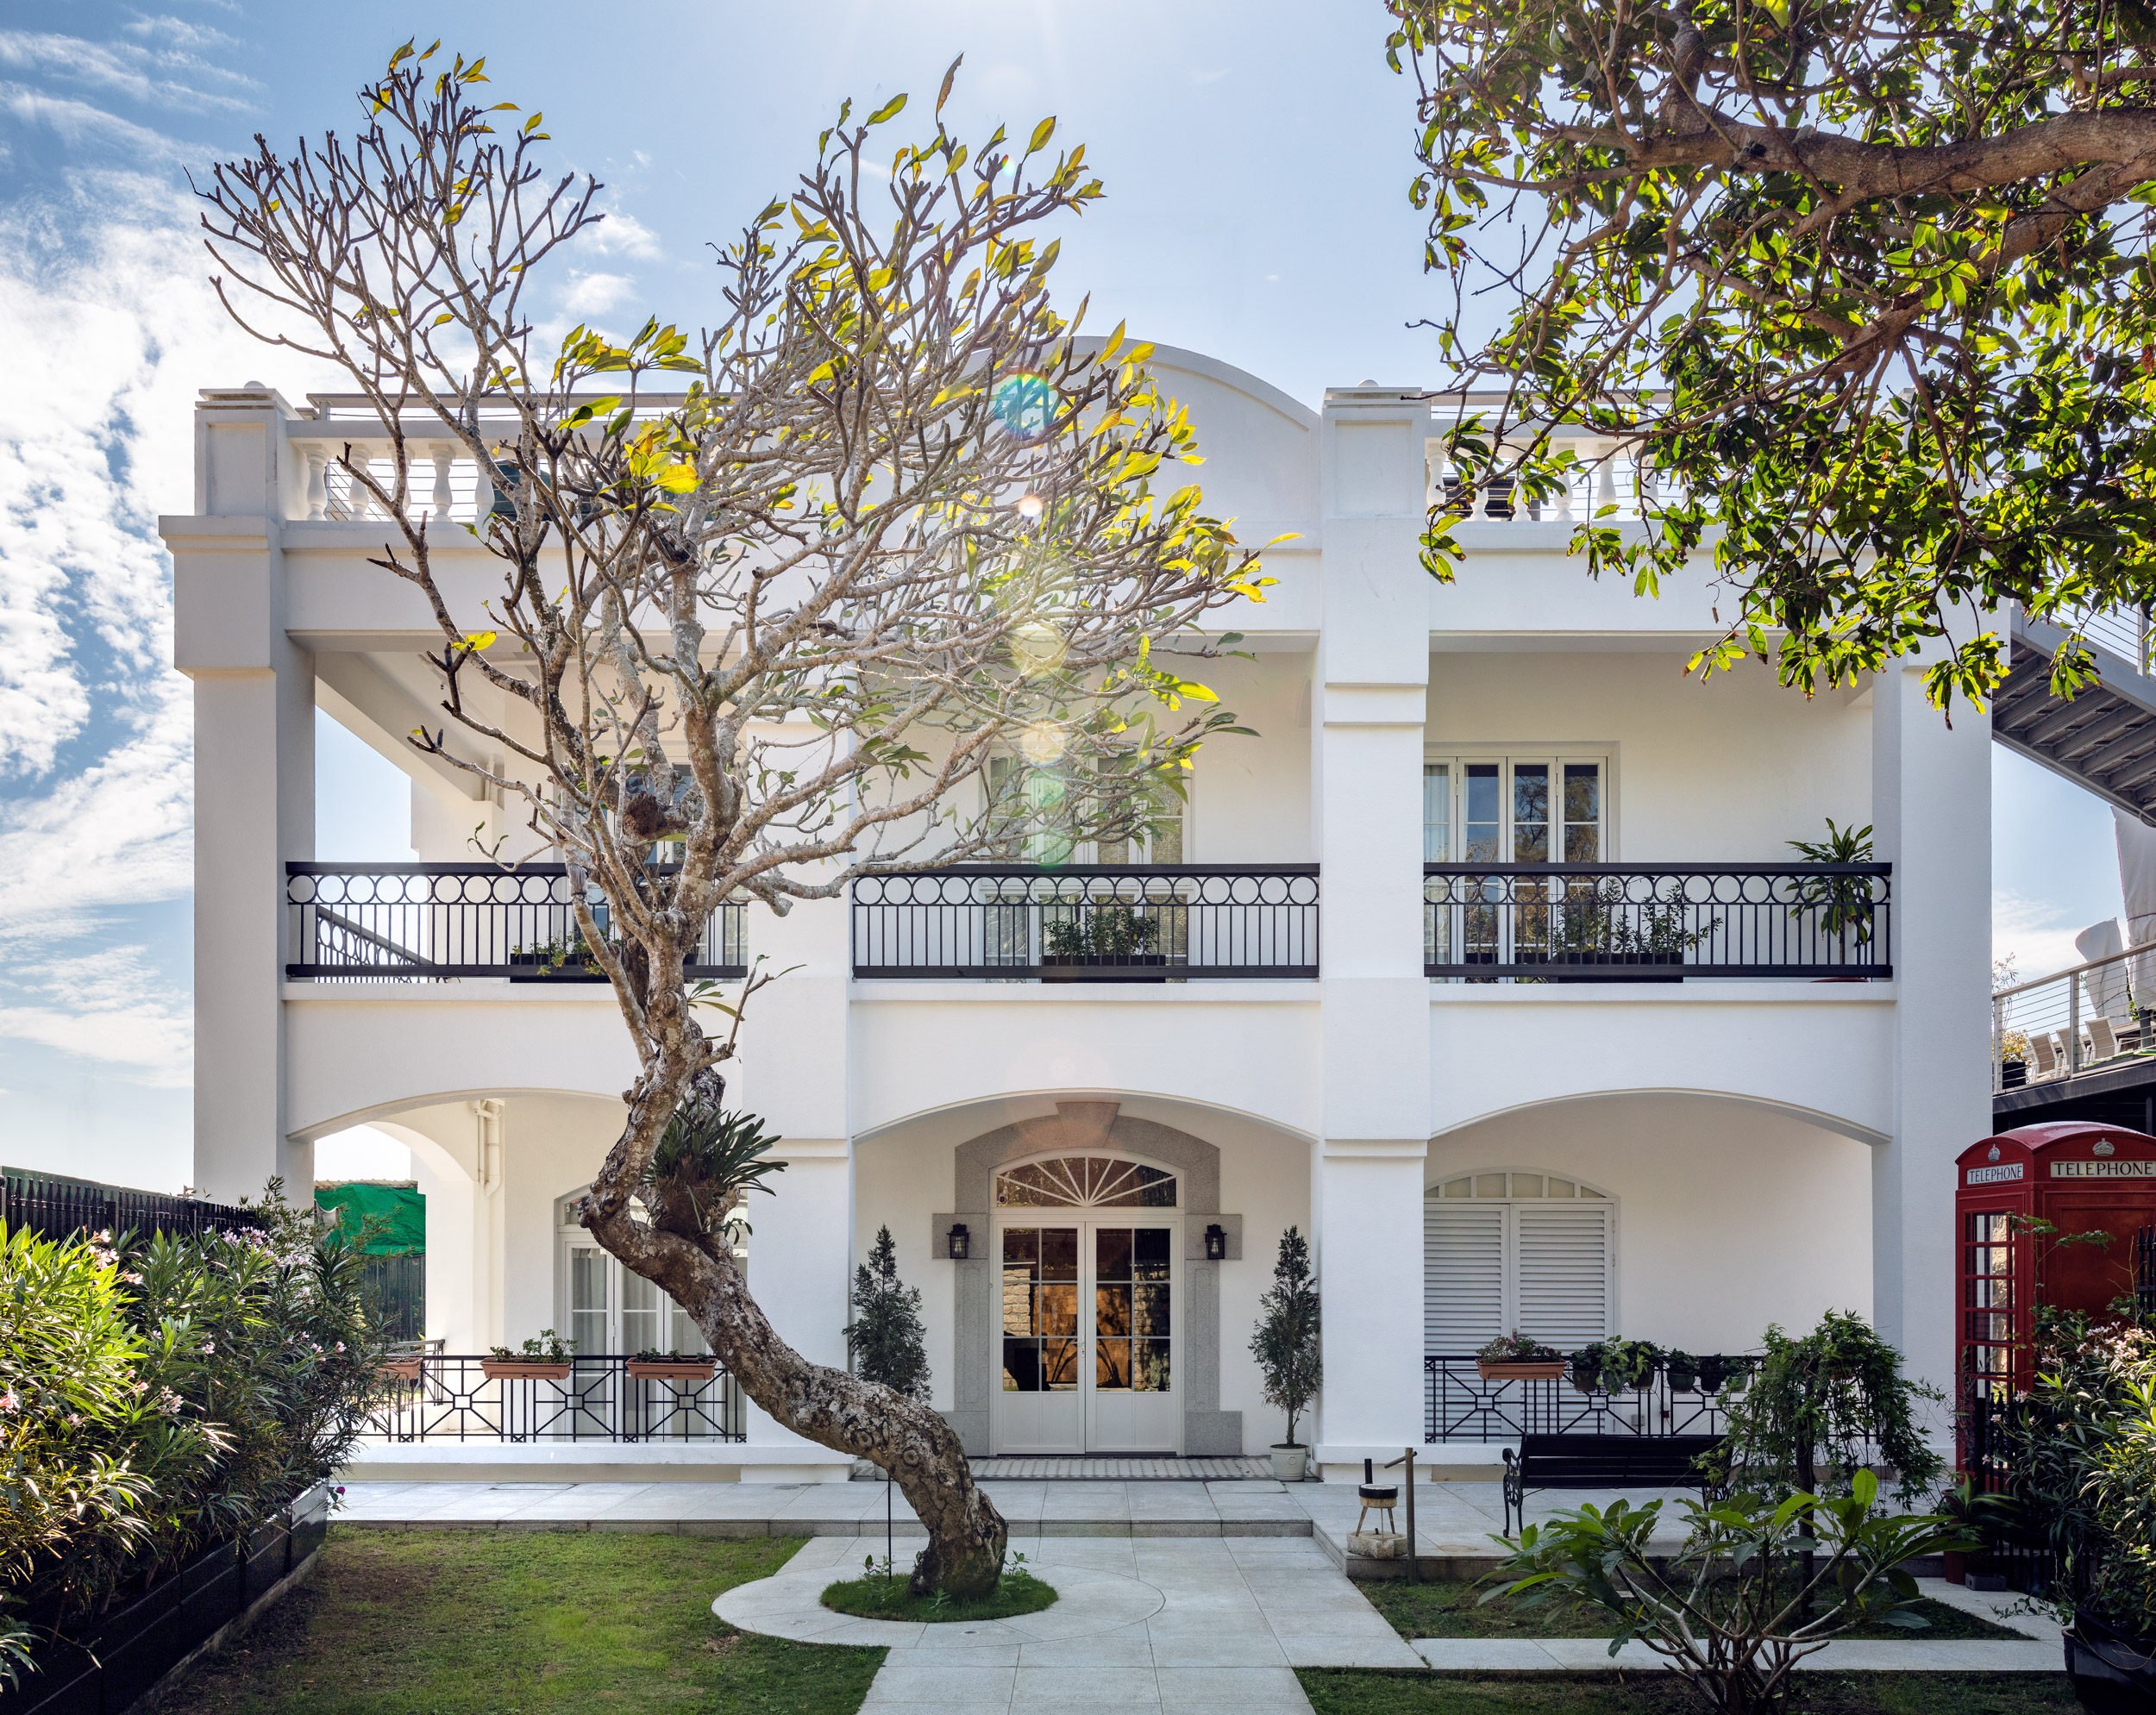 Architect Eric Chih and interior designer Kaye Dong turned the site of a rundown nunnery on Hong Kong’s Cheung Chau island into a home with “that old colonial building look”. Photo: Dennis Lo